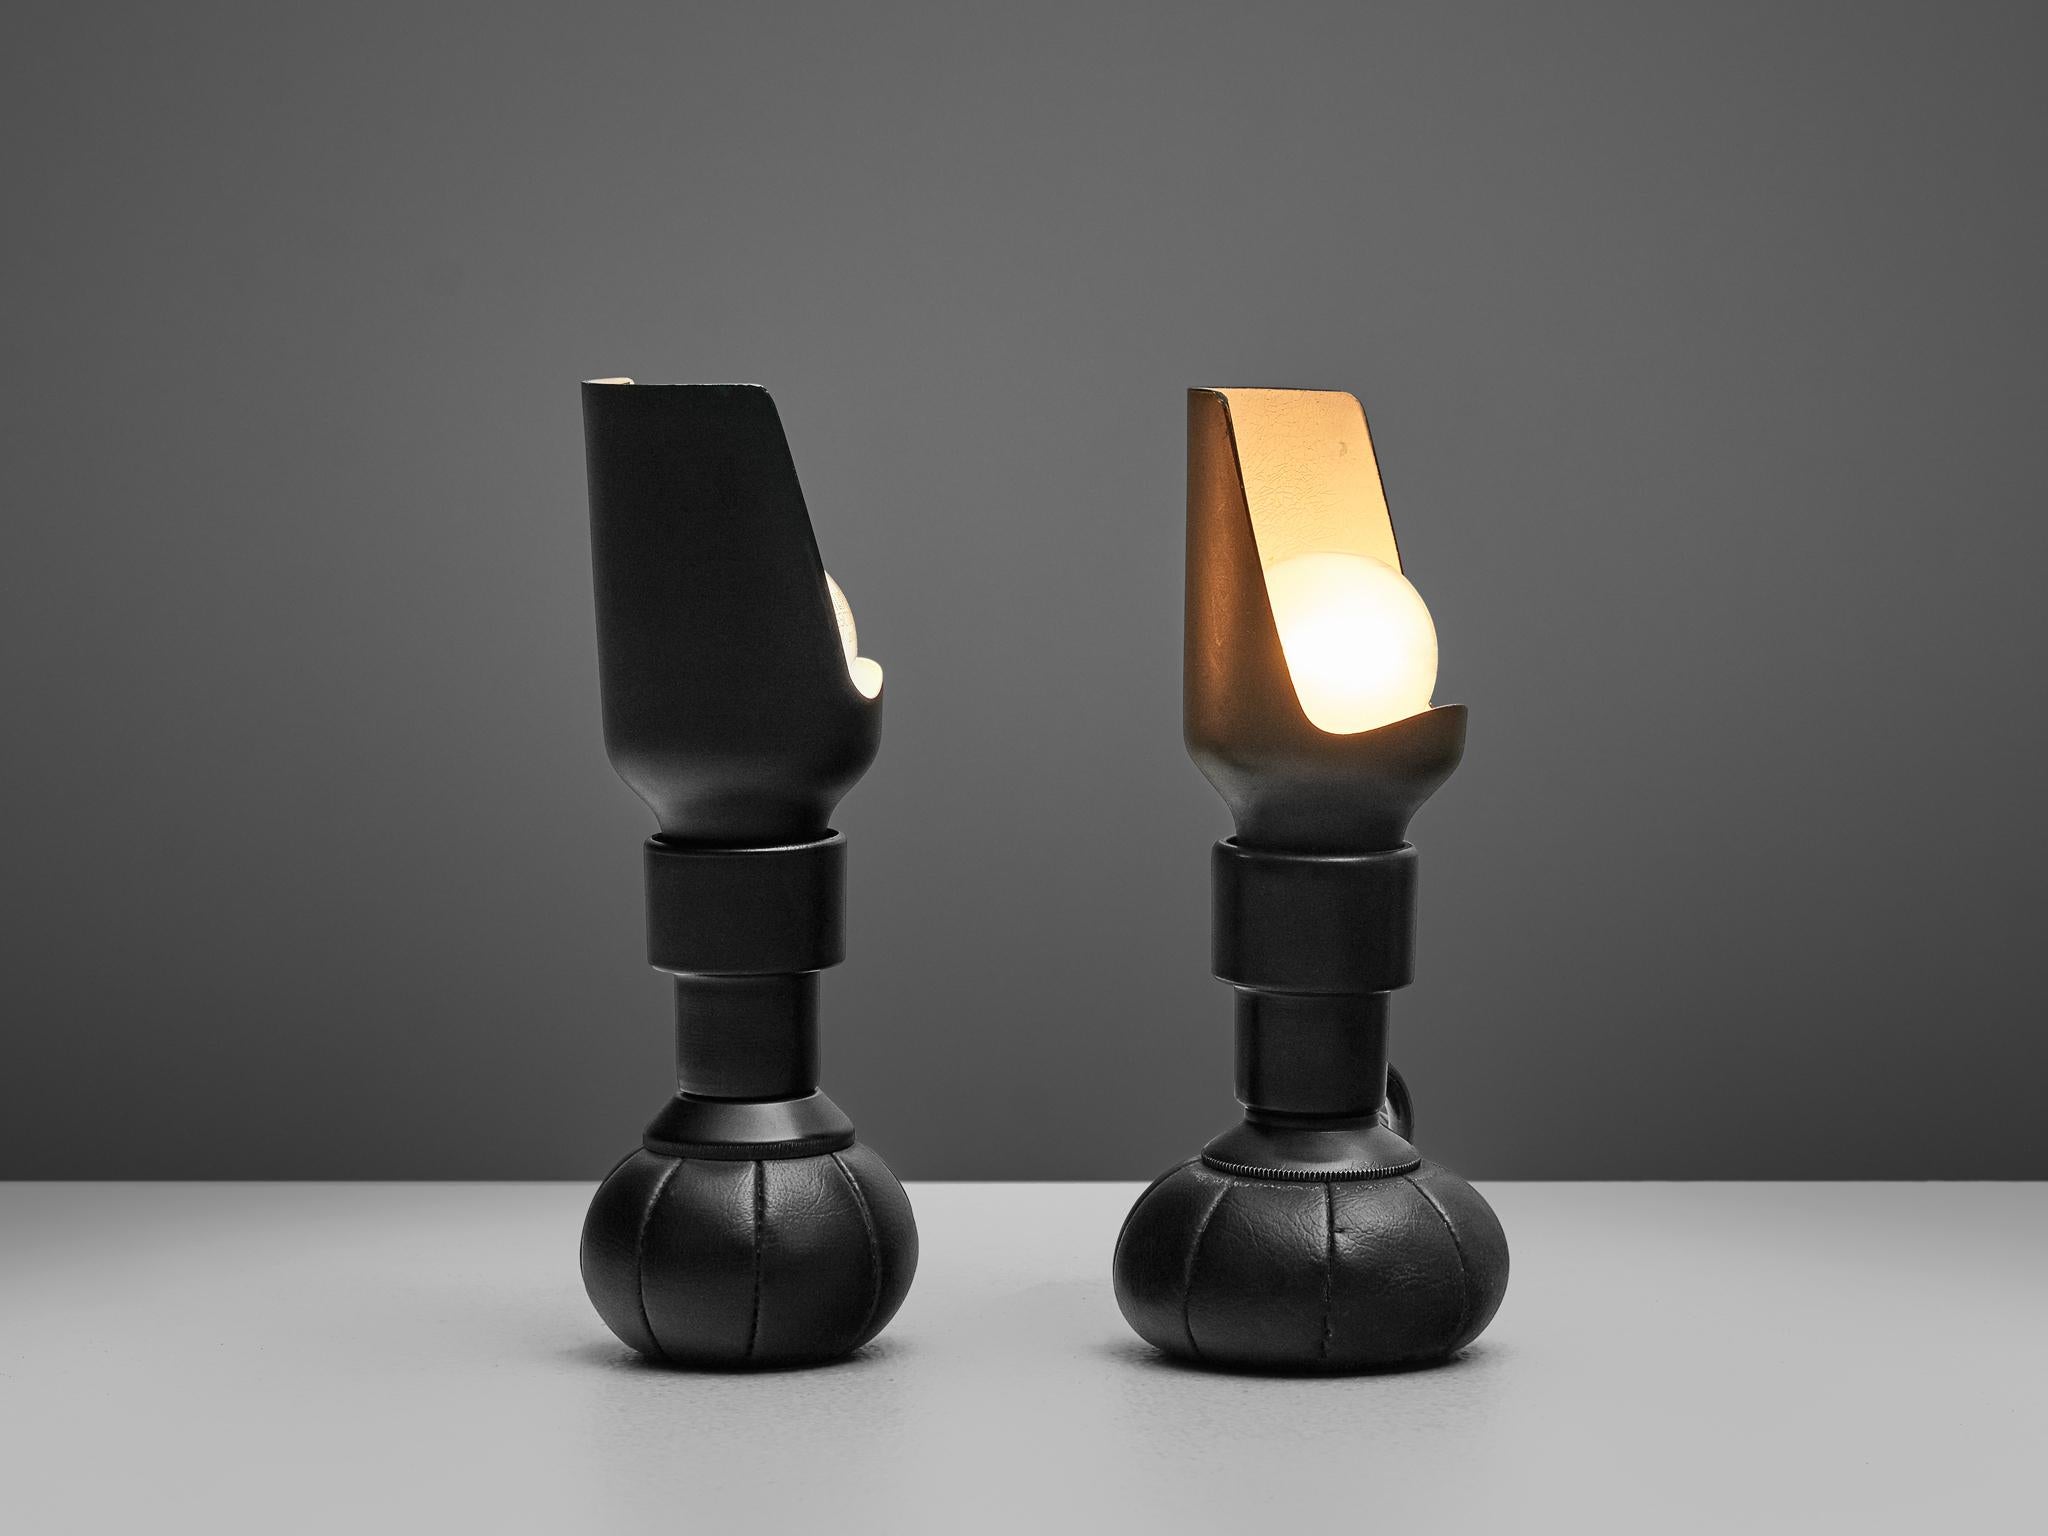 Gino Sarfatti for Arteluce, pair of model '600C' table lamps, black lacquered aluminum, black leather, Italy, 1966

A pair of exceptional lights by Gino Sarfatti for Arteluce. Weights at the bottom in shape of a round ball keep the lights in their